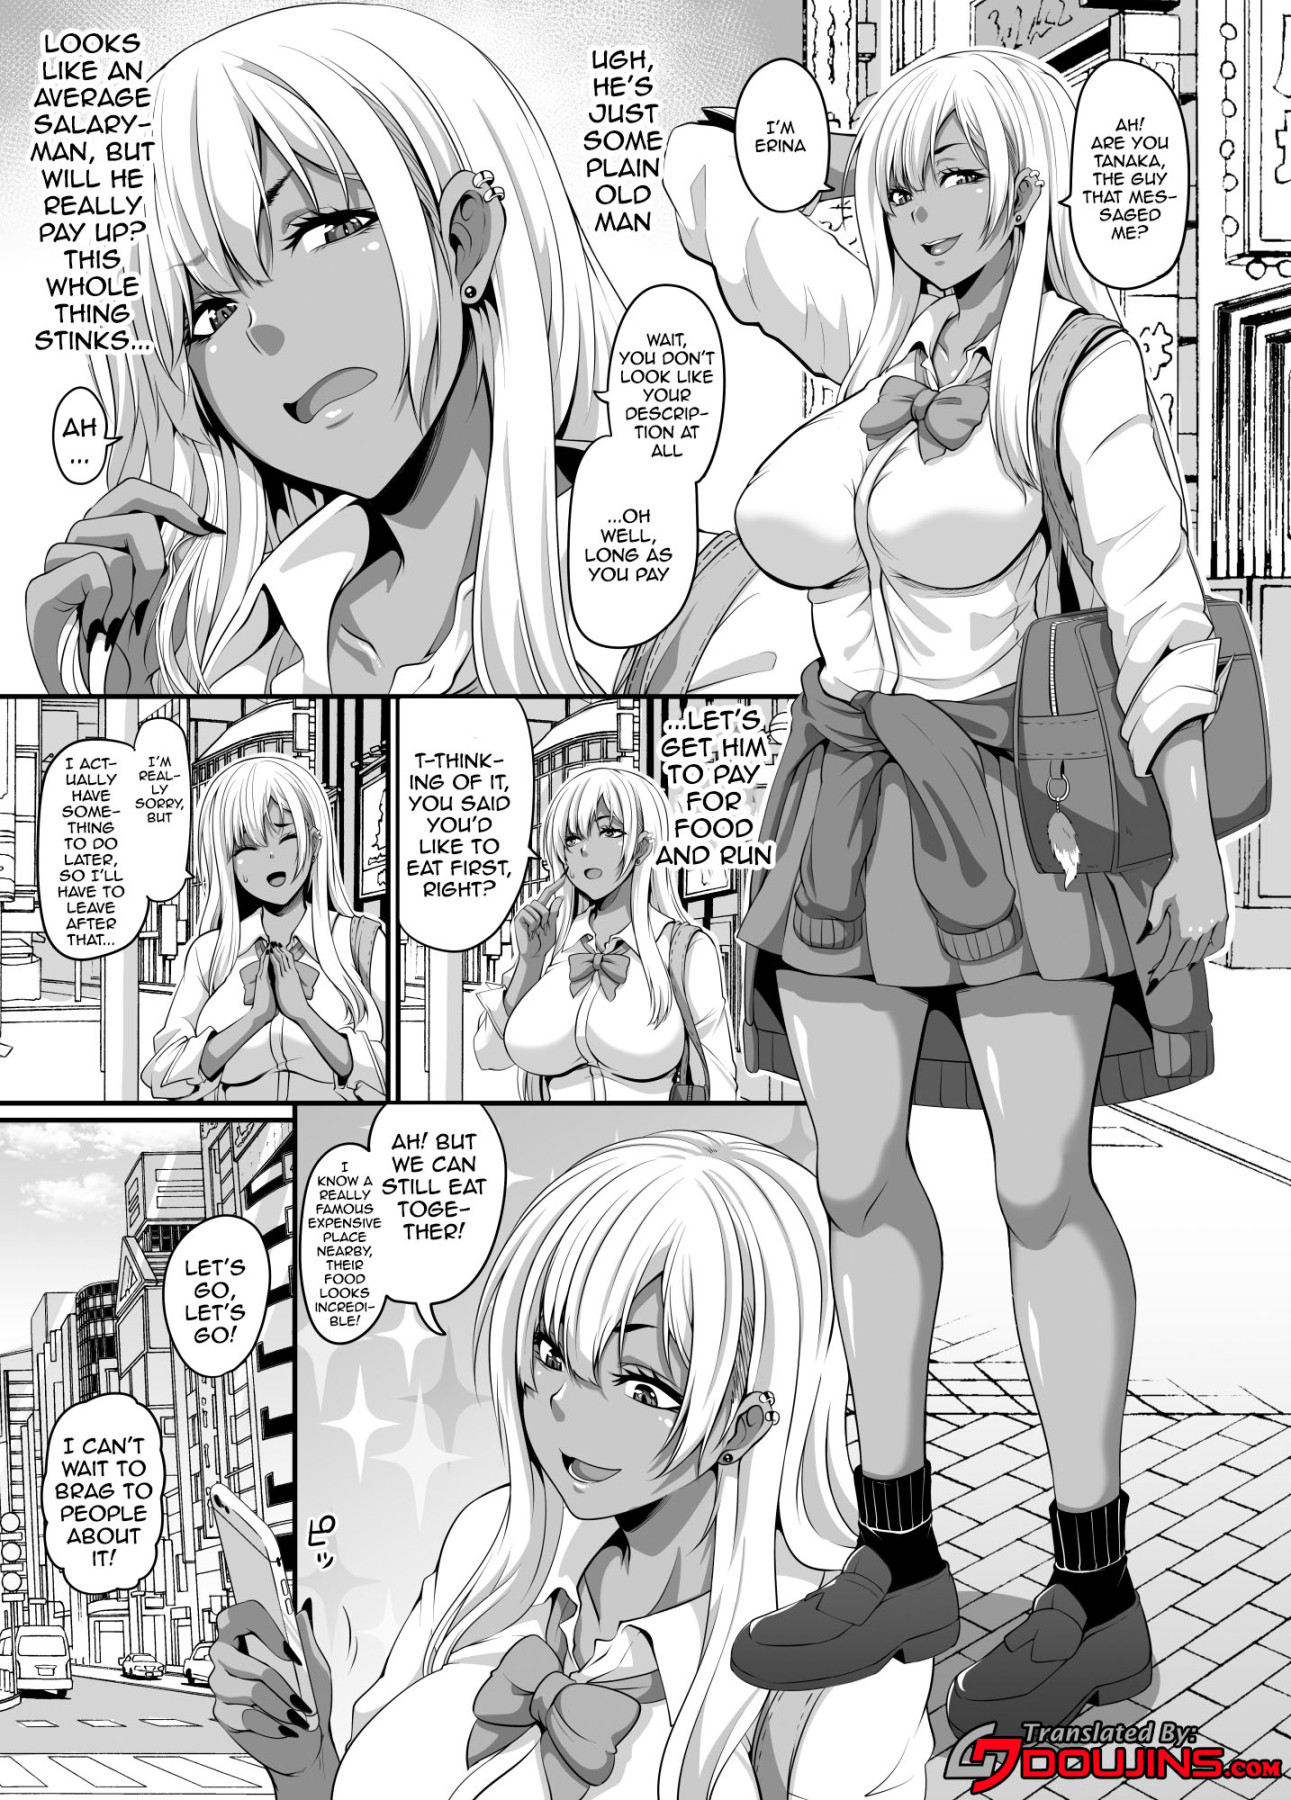 Hentai Manga Comic-A Sugar Daddy And The Gyaru Girls He Pays To Have An Orgy With Him-Read-3